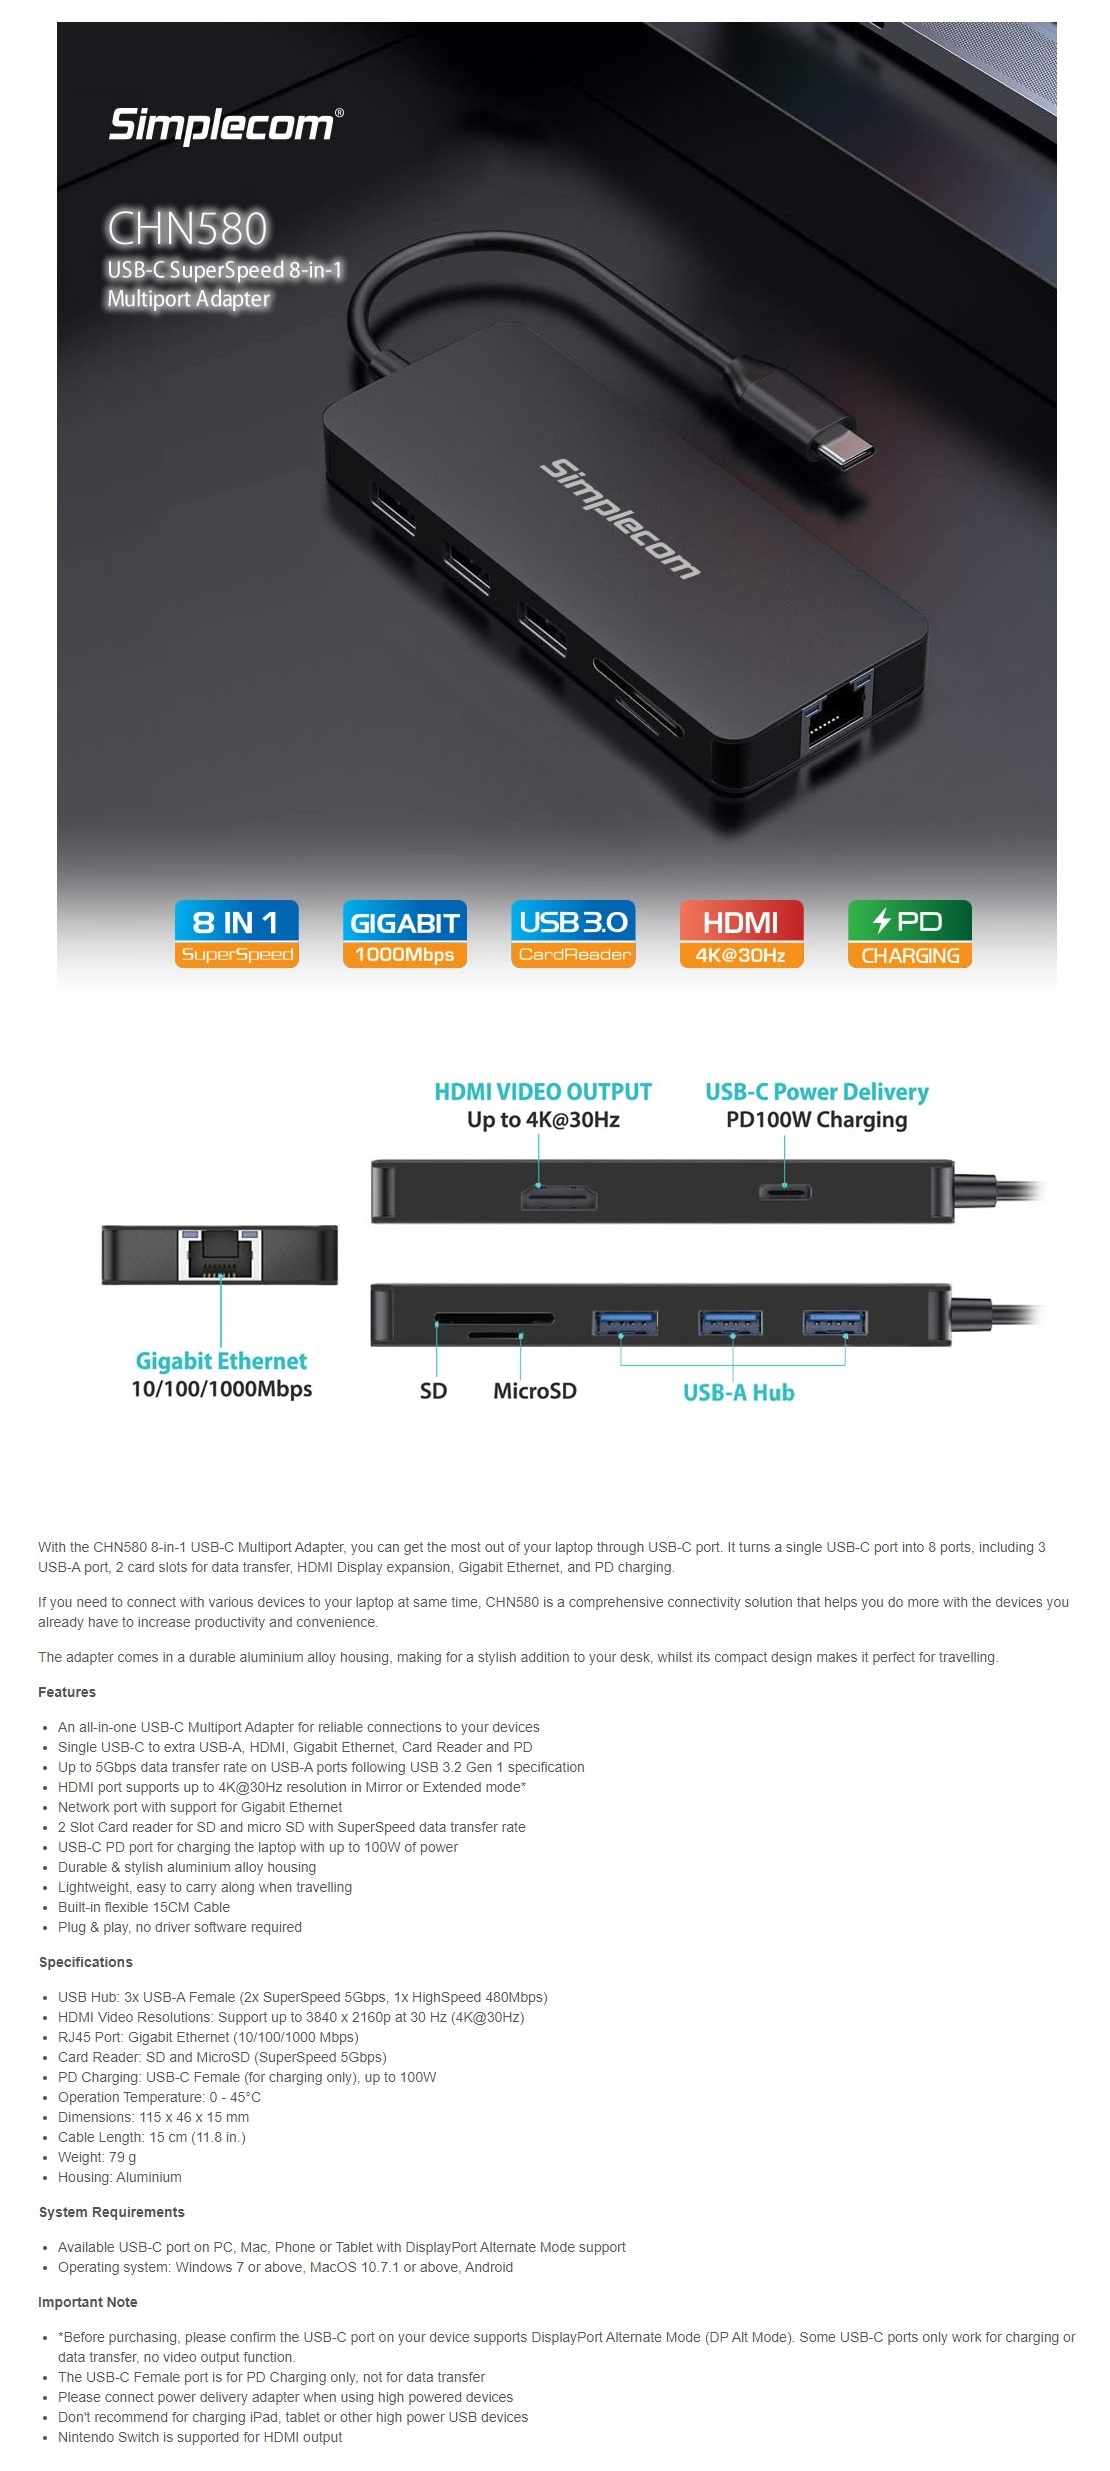 A large marketing image providing additional information about the product Simplecom CHN580 Aluminium 8-in-1 USB-C Multiport Hub Adapter - Additional alt info not provided